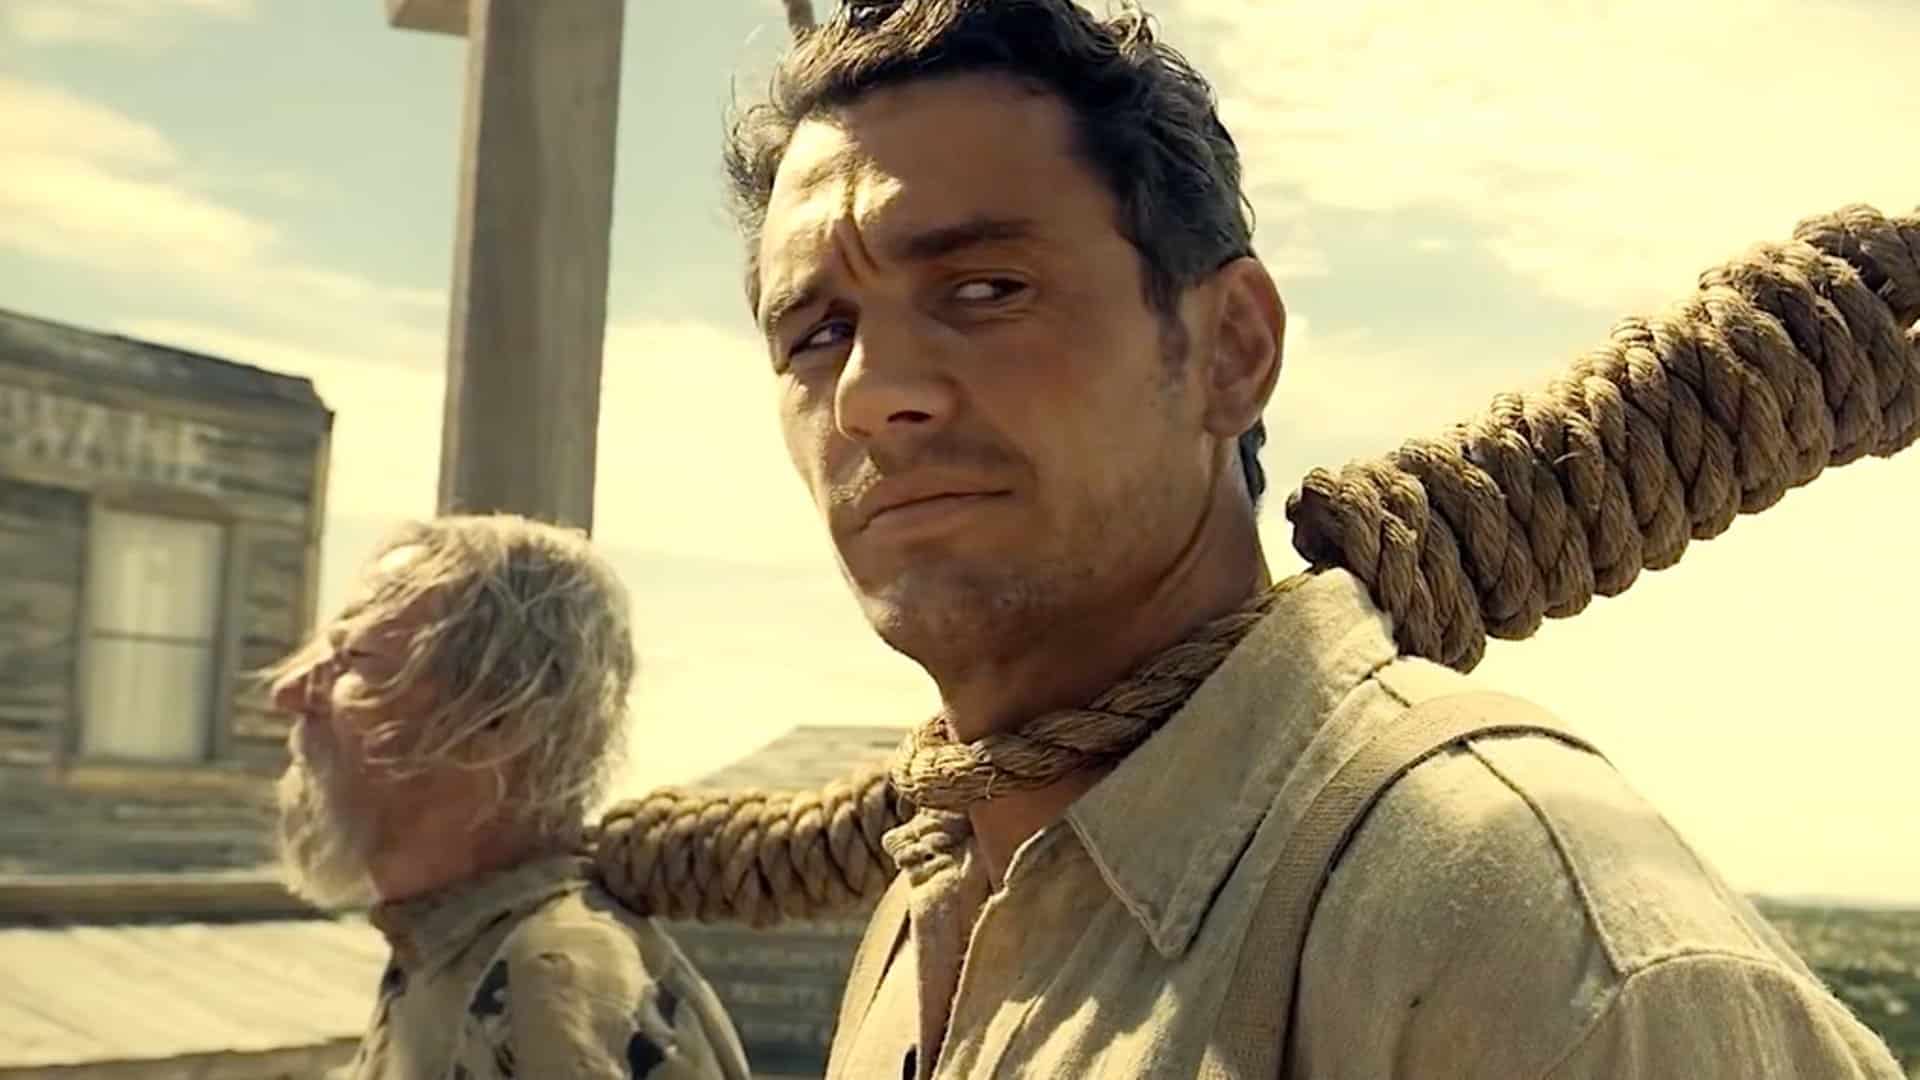 The Ballad Of Buster Scruggs Movie Review For Buster, Stay